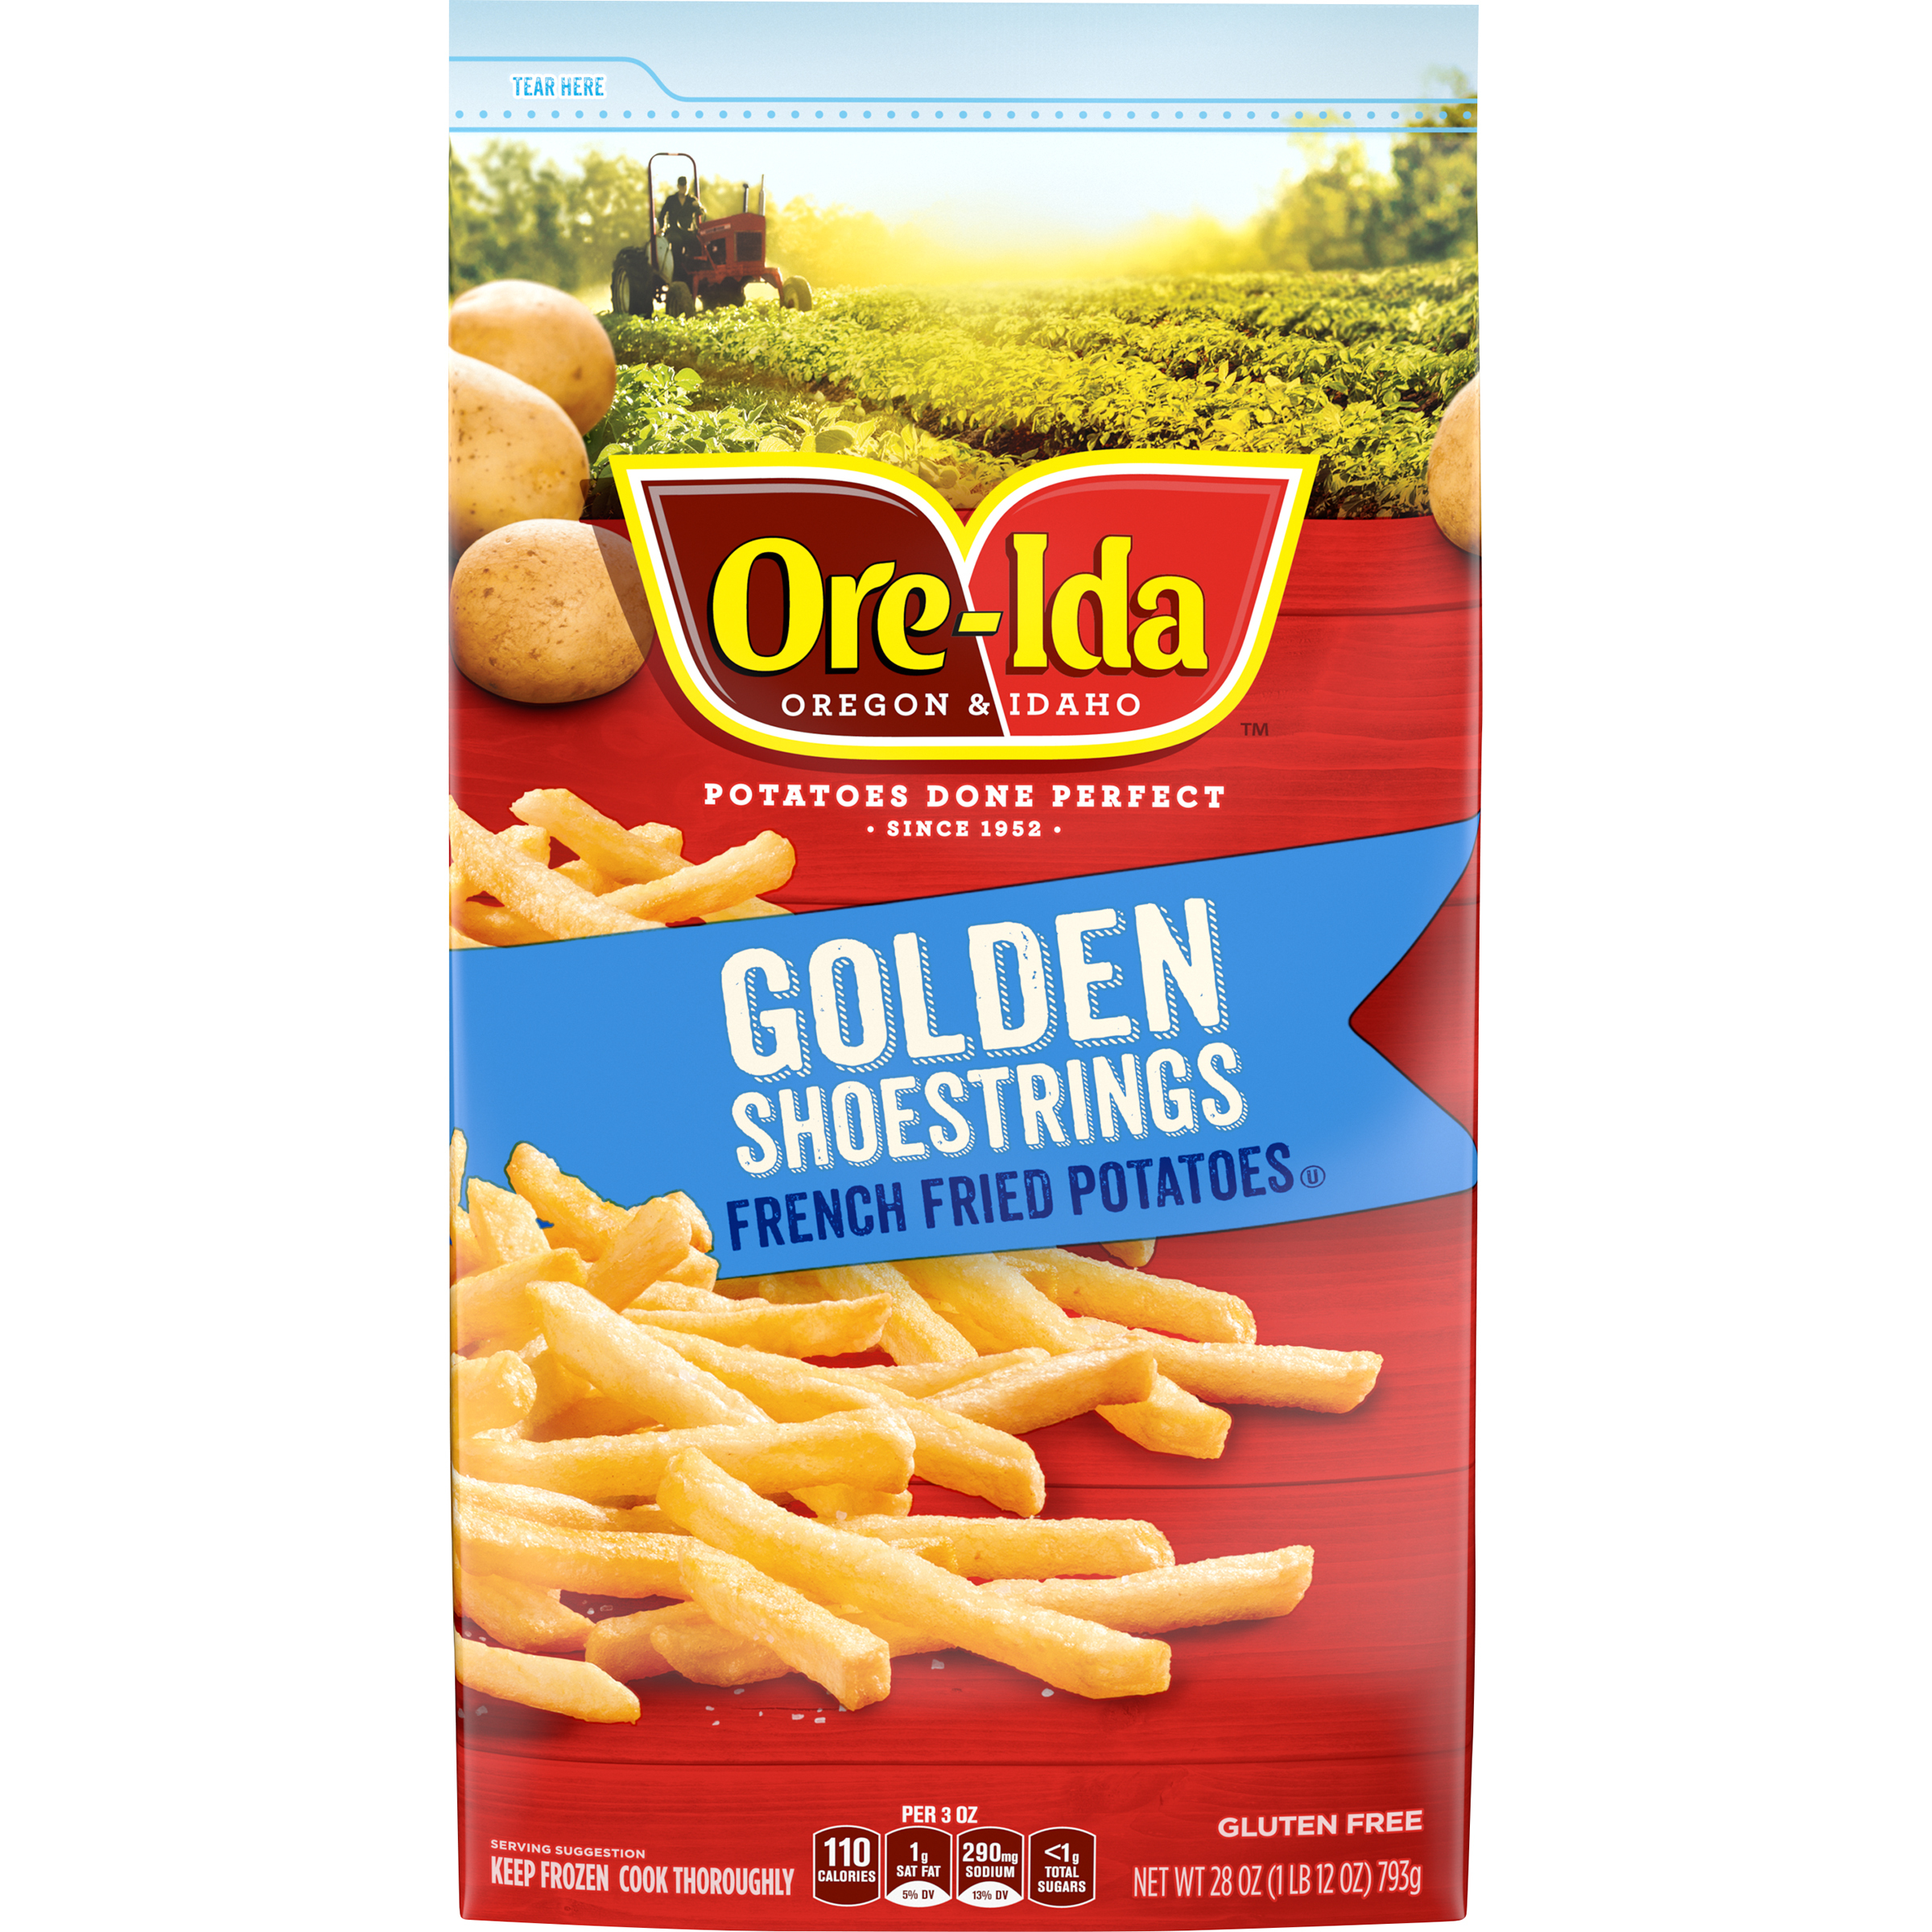 Golden Shoestring French Fries - ORE-IDA